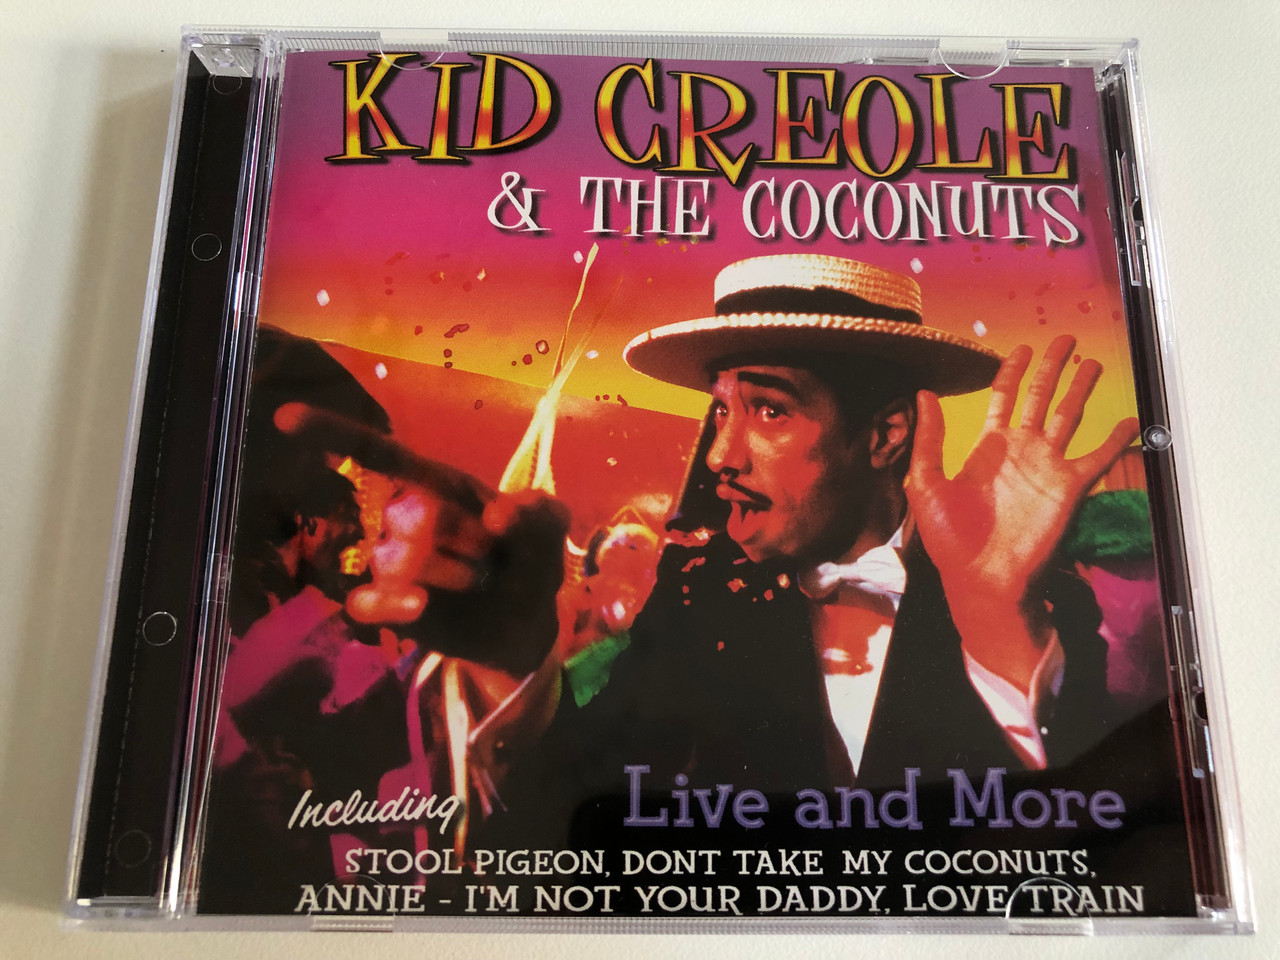 Kid Creole & The Coconuts – Live And More / Including: Stool Pigeon, Don't  Take My Coconuts, Annie, I'm Not Your Daddy, Love Train / A Play Collection  Audio CD 2000 / 10433-2 - bibleinmylanguage